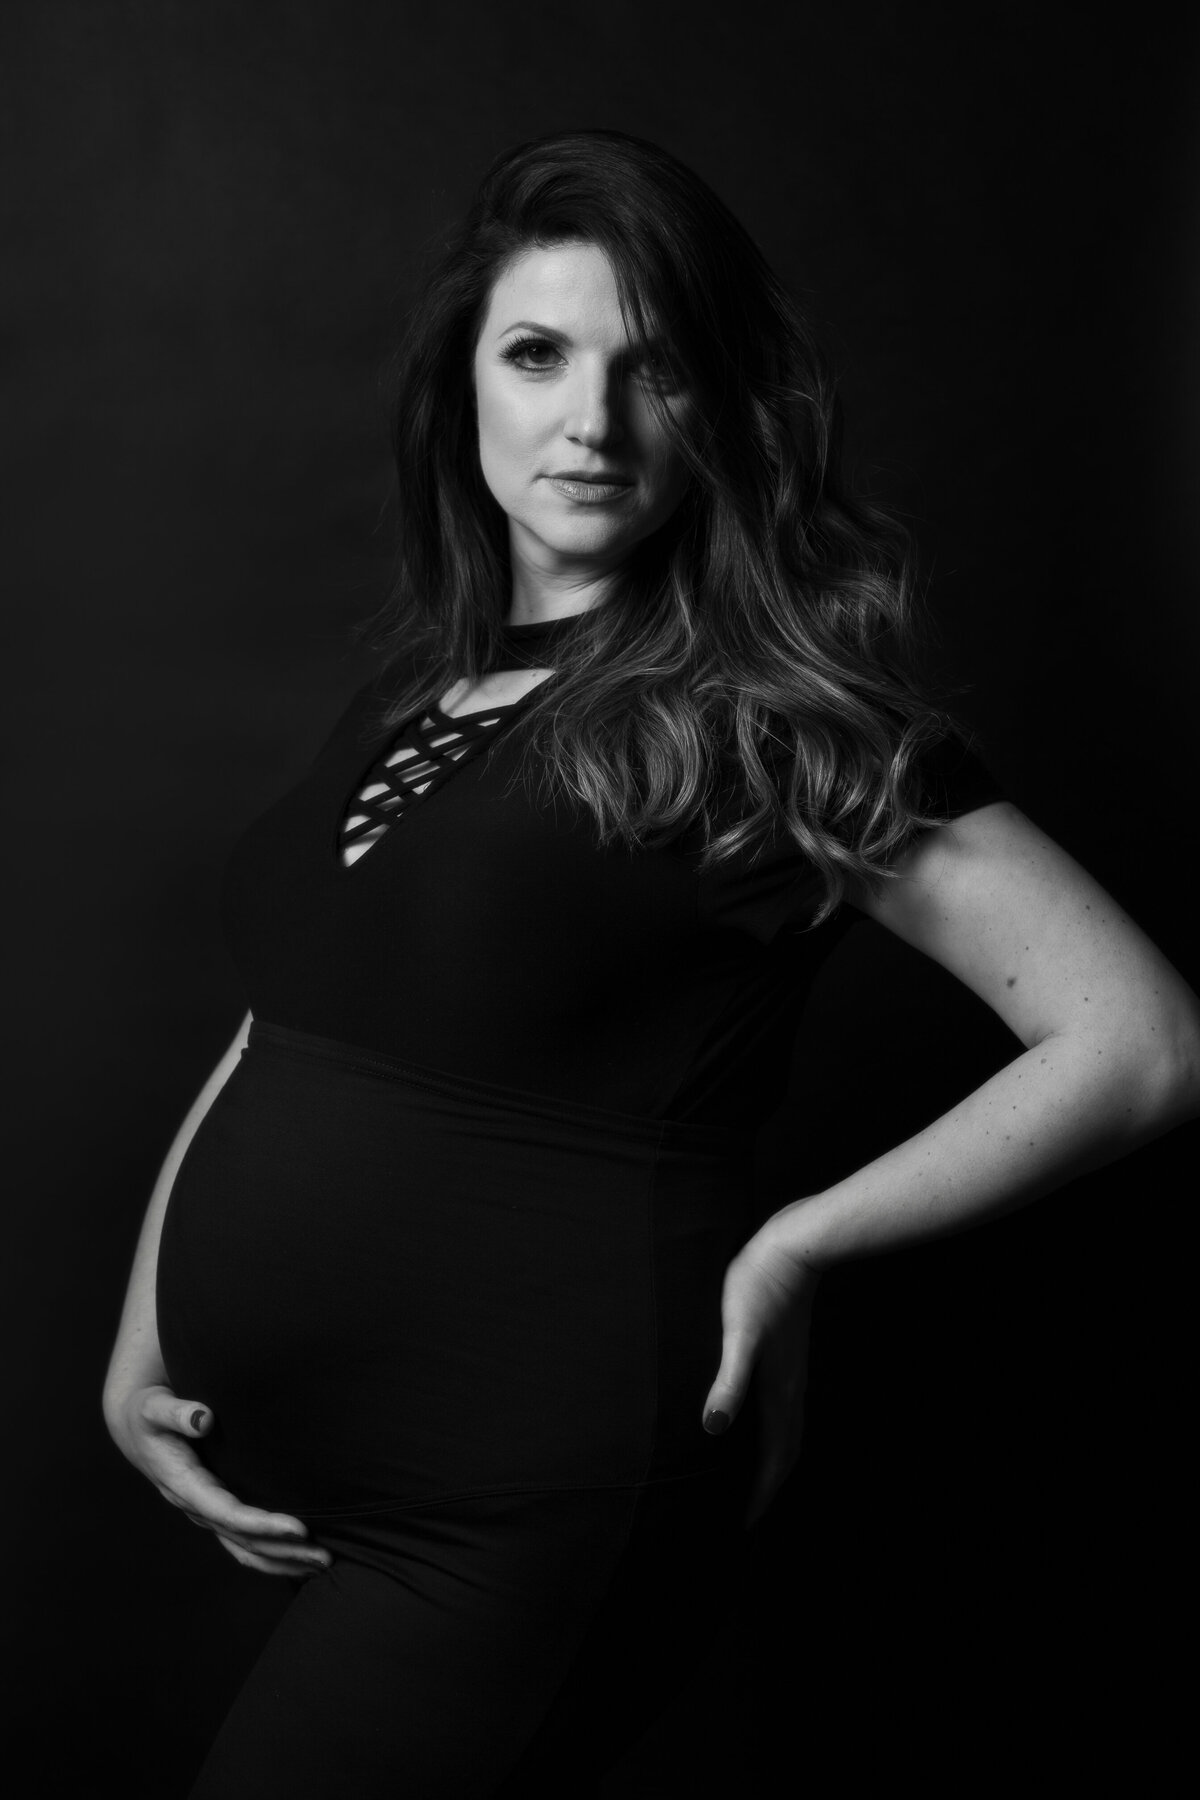 Ellen Rashko Portraits is a professional photographer specializing in maternity & motherhood photos in South Florida.